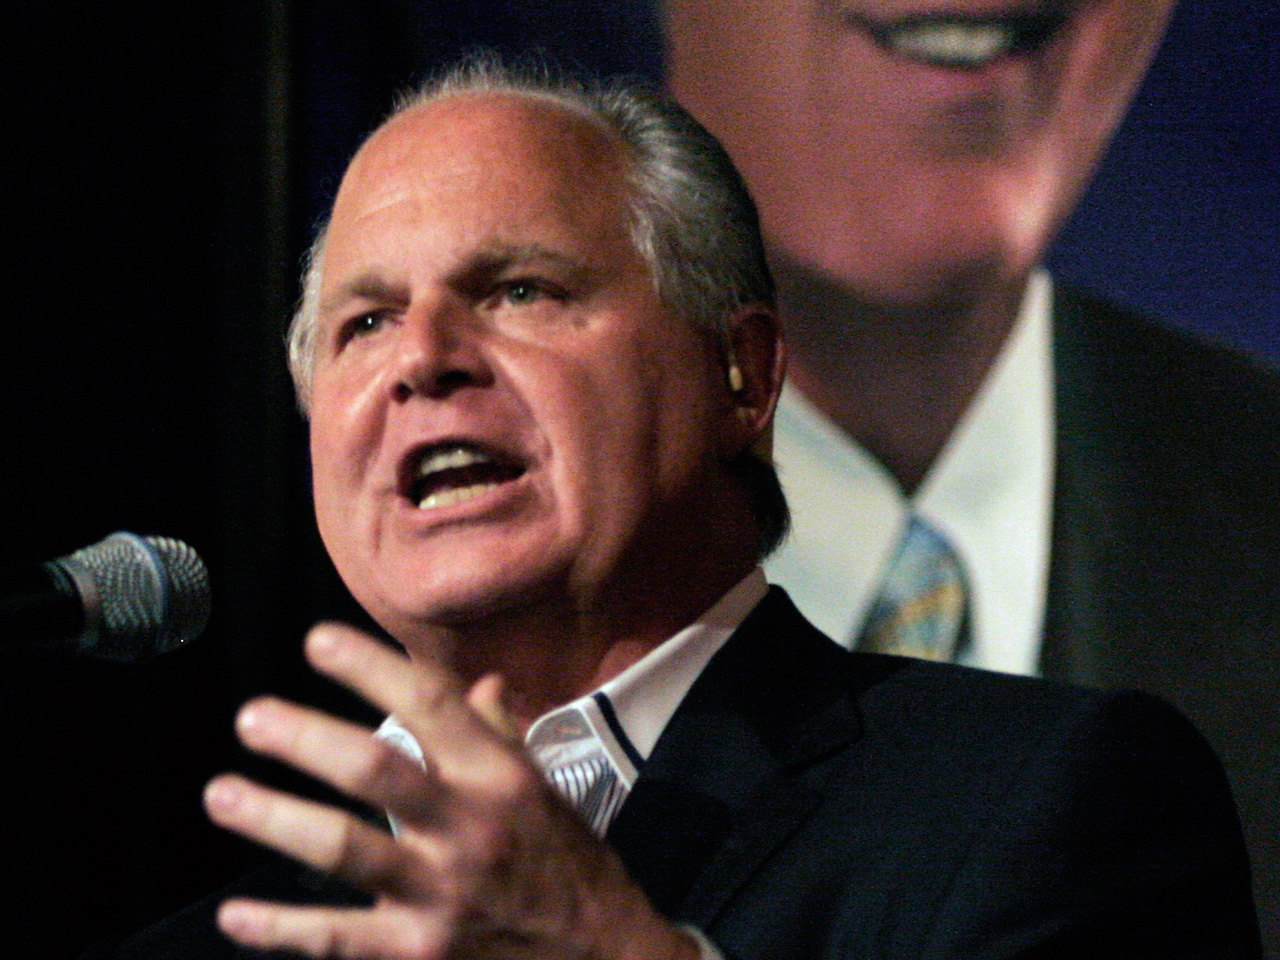 Nine advertisers have pulled out of Limbaugh's show - CBS News